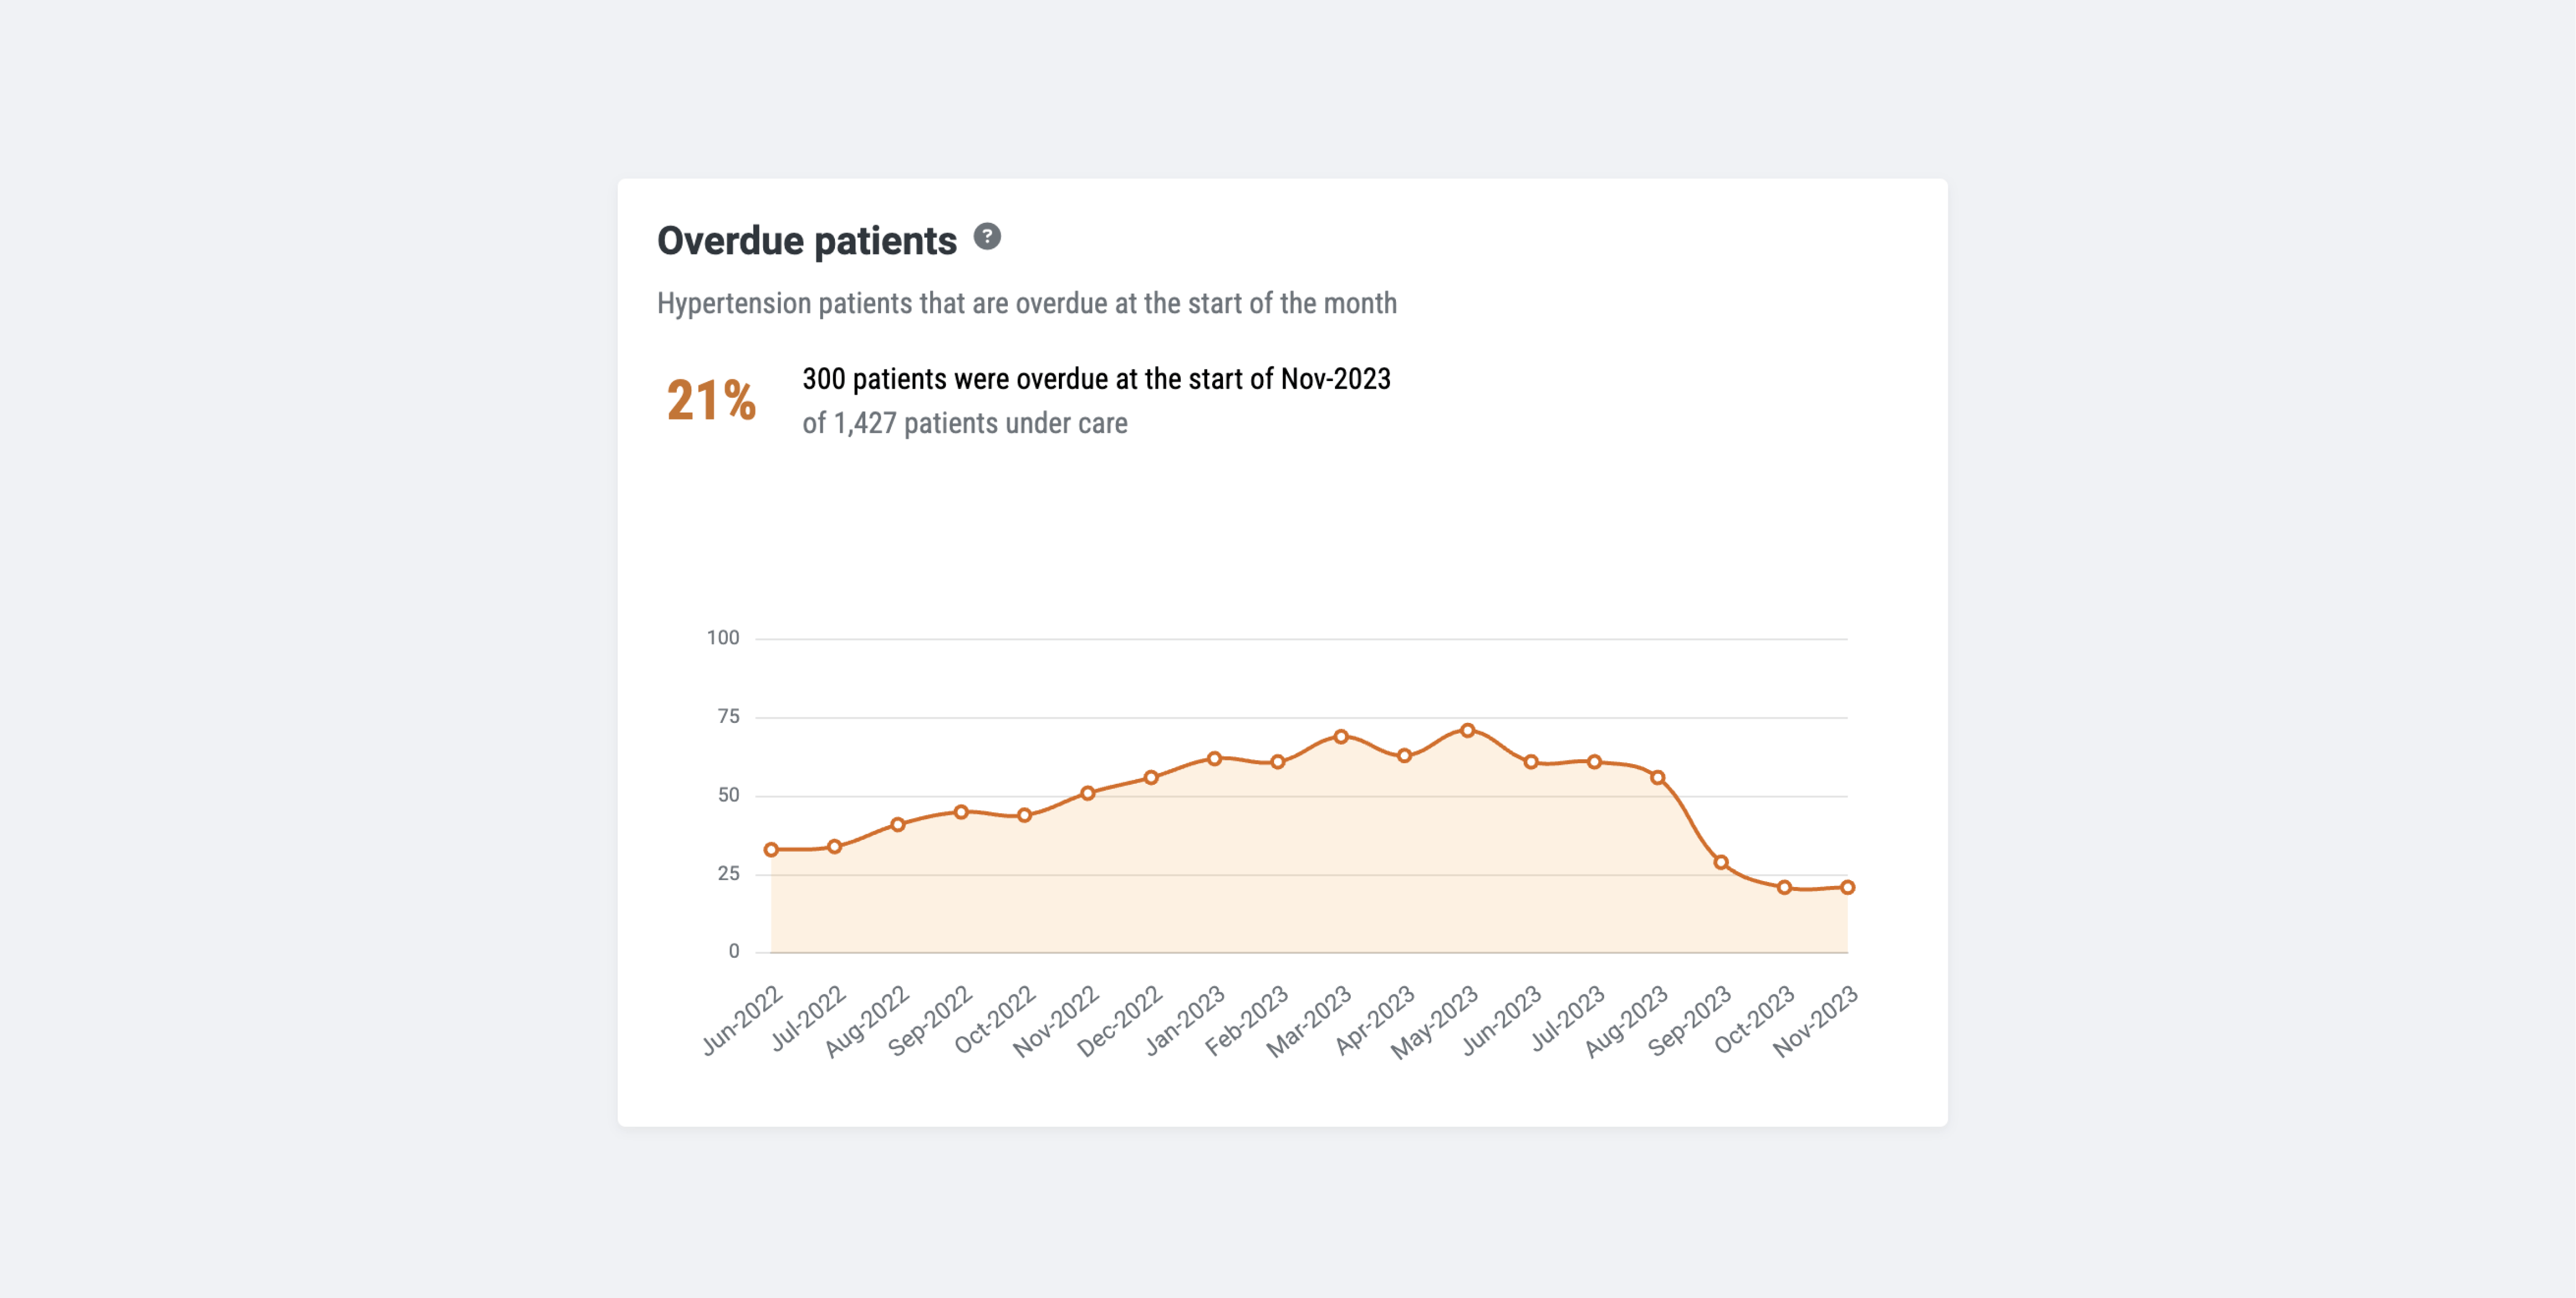 How do we reveal the data behind overdue patient calls in a meaningful way?